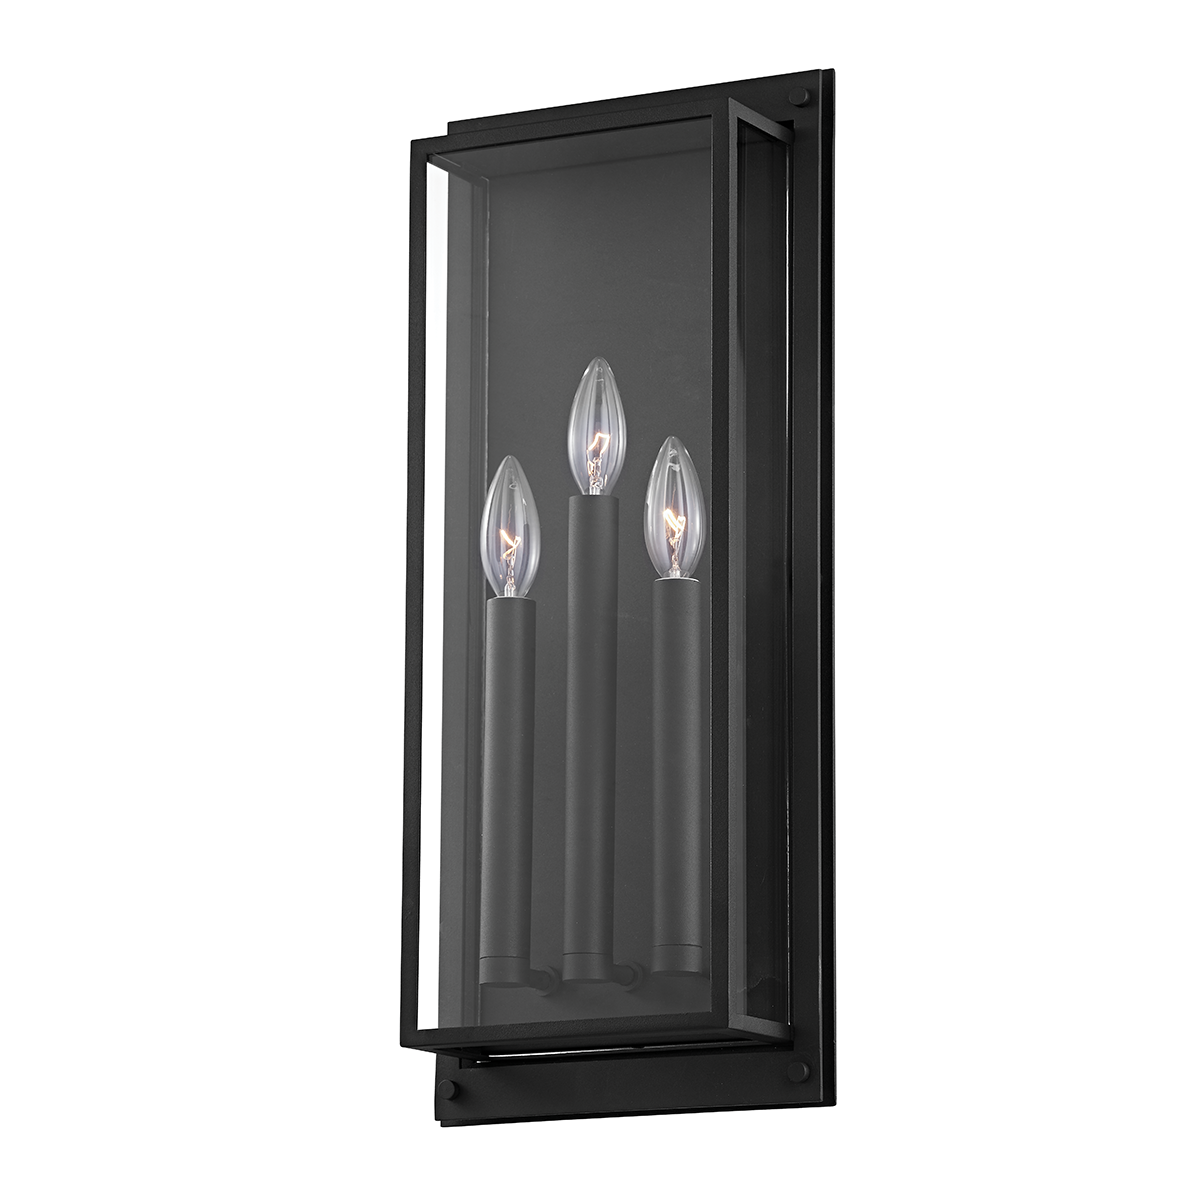 Troy Lighting 1 LIGHT LARGE EXTERIOR WALL SCONCE B9103 Outdoor l Wall Troy Lighting TEXTURE BLACK  